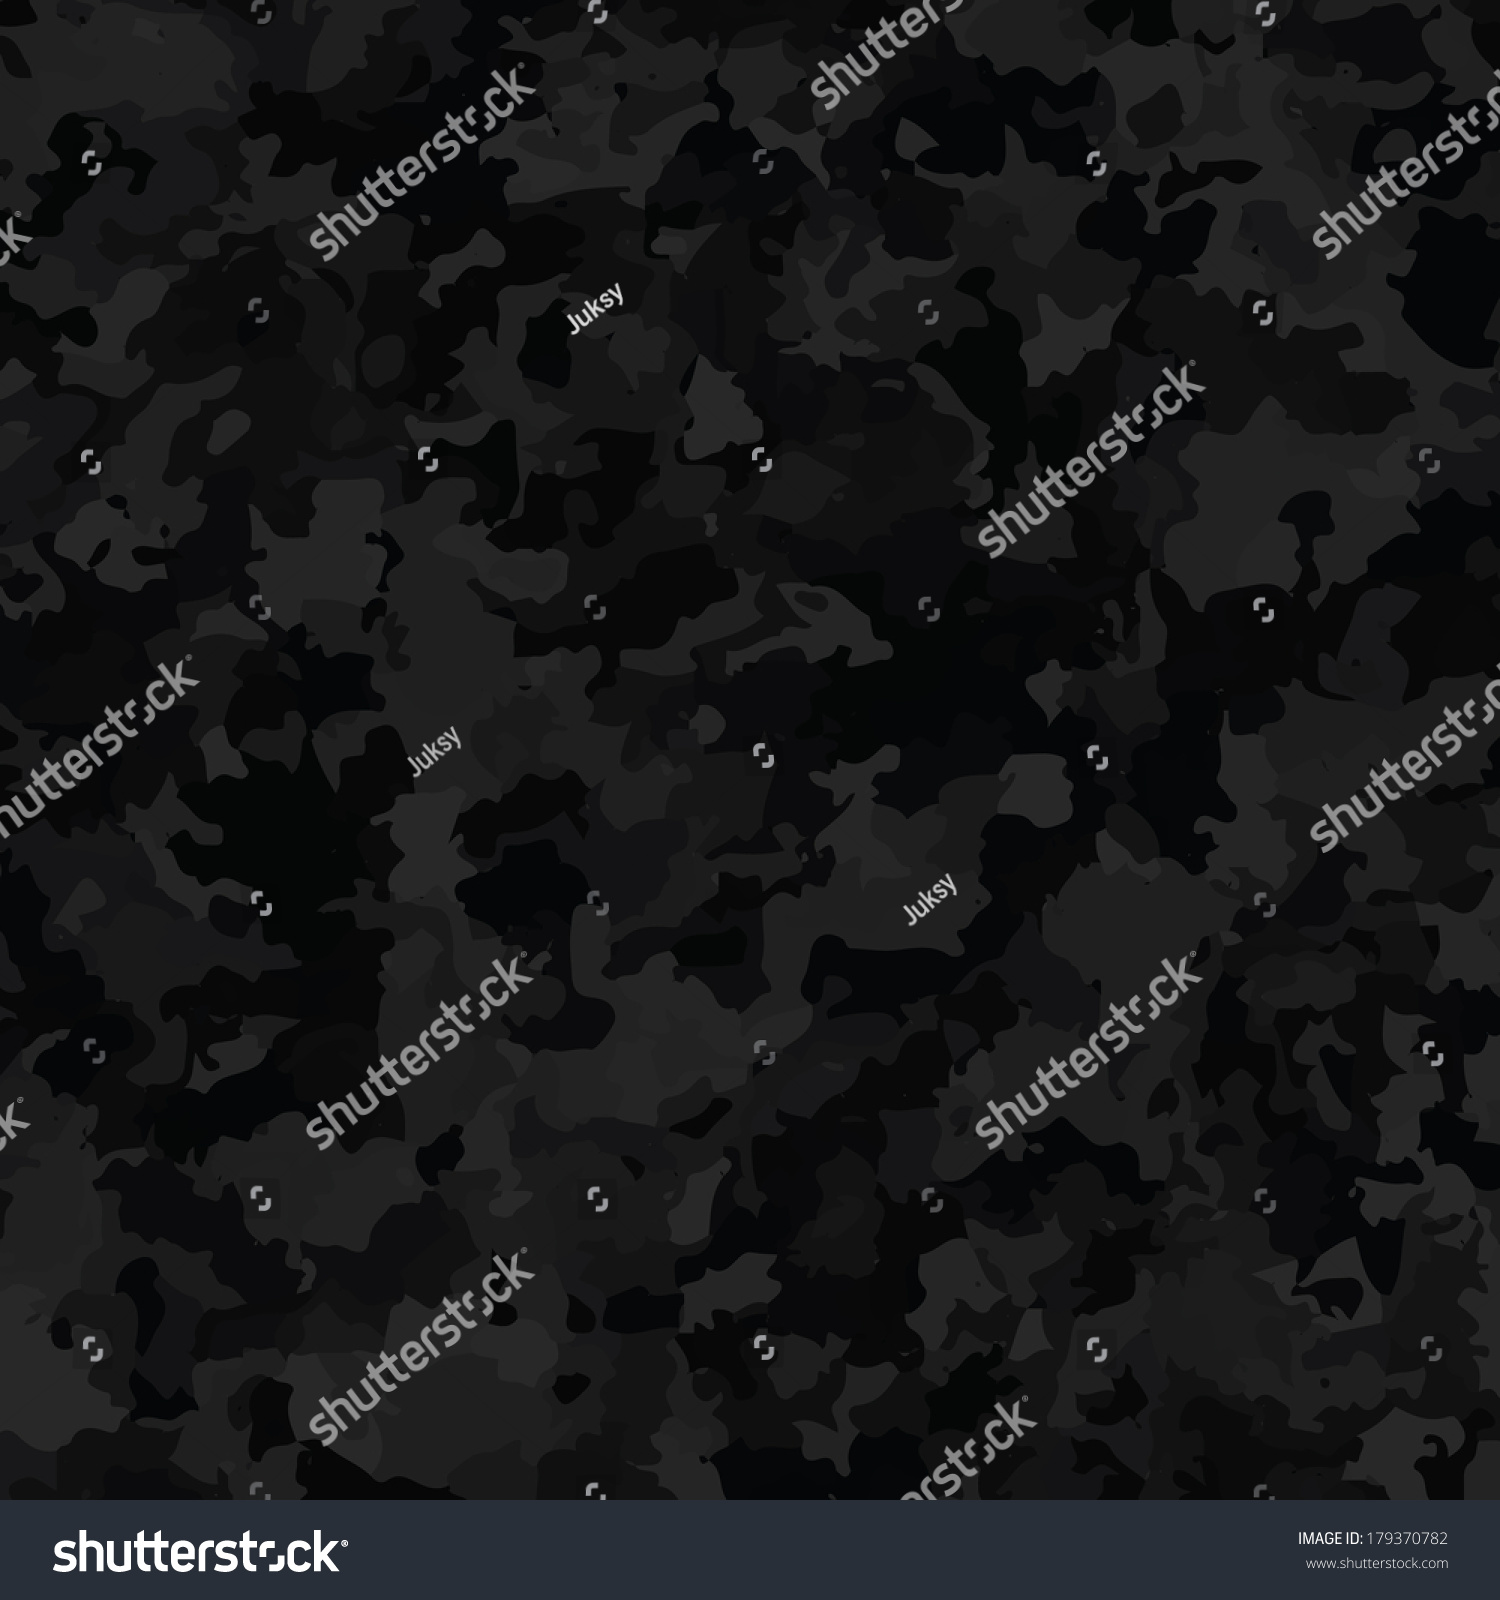 SVG of Camouflage military background. Abstract pattern. Vector illustration EPS svg